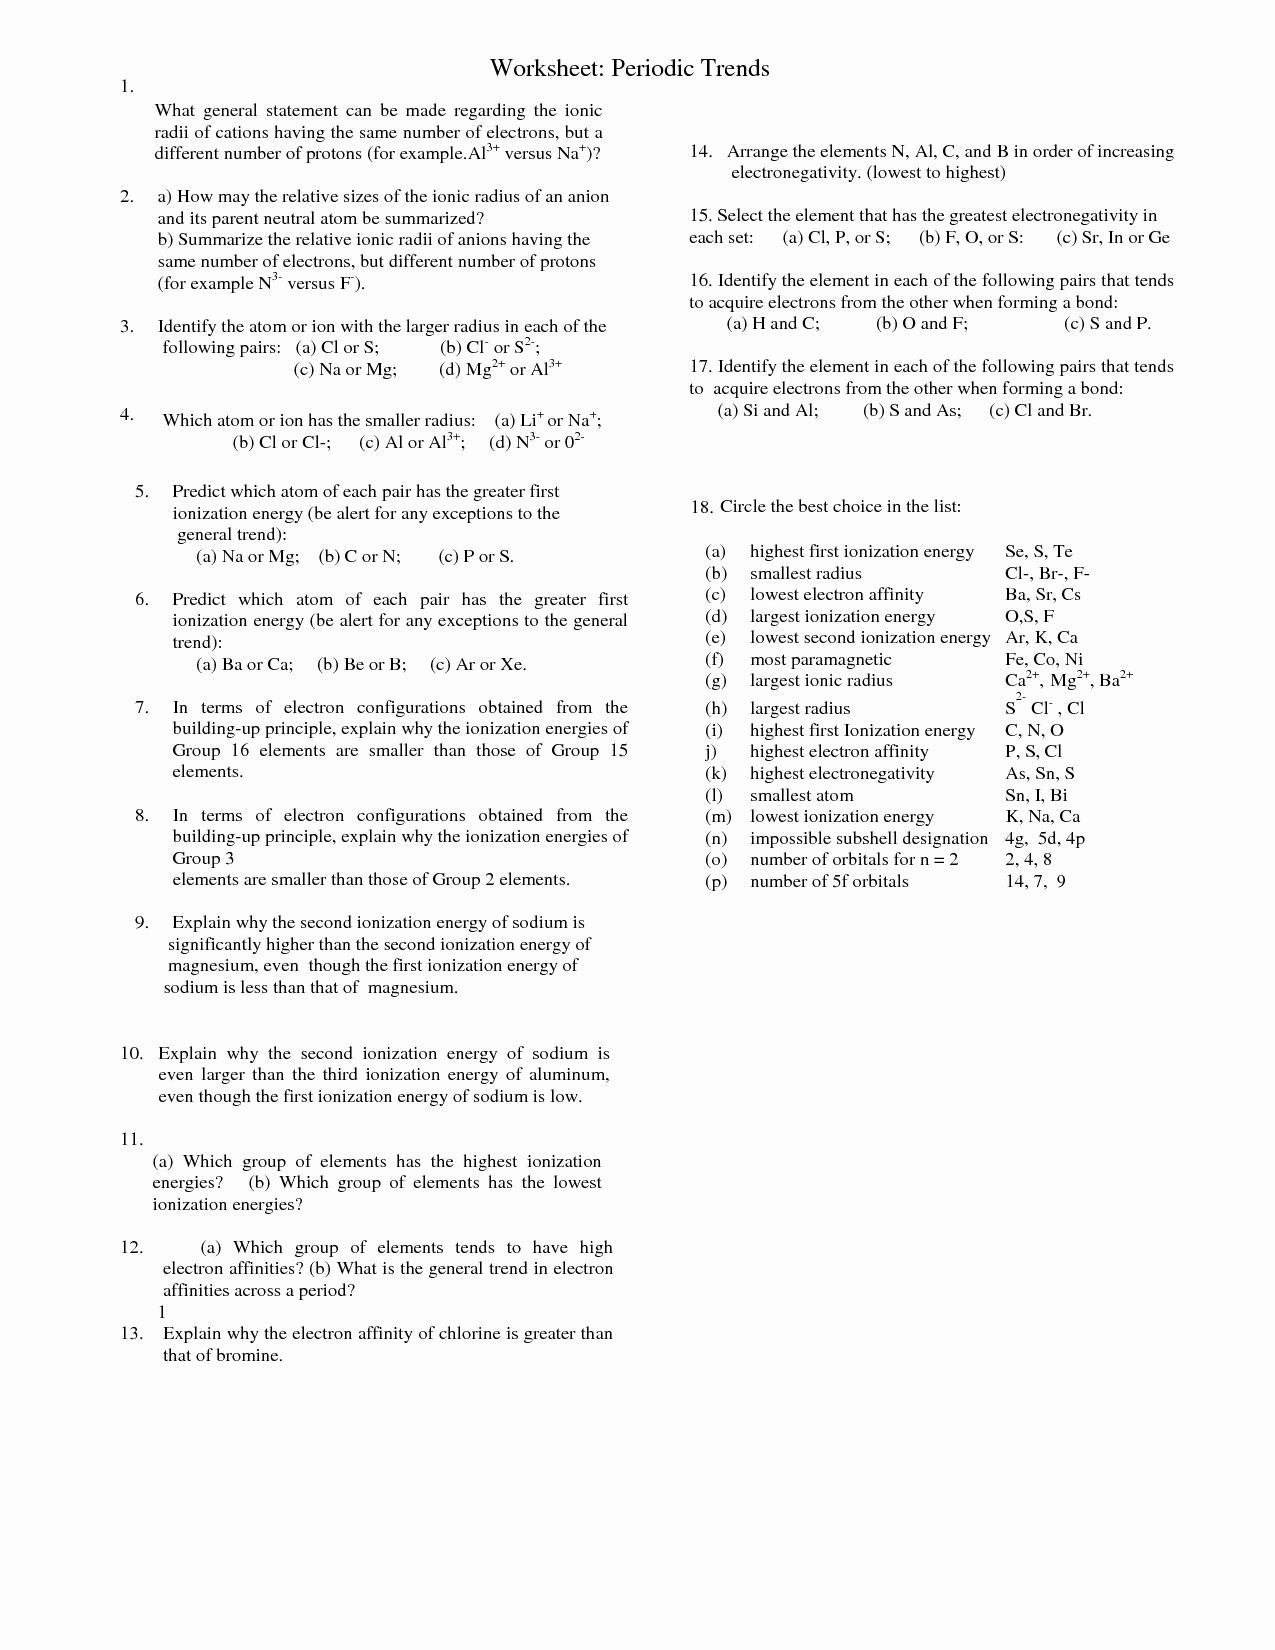 Worksheet Periodic Trends Answers Inspirational 20 Best Of Periodic Trends Worksheet Answers Key